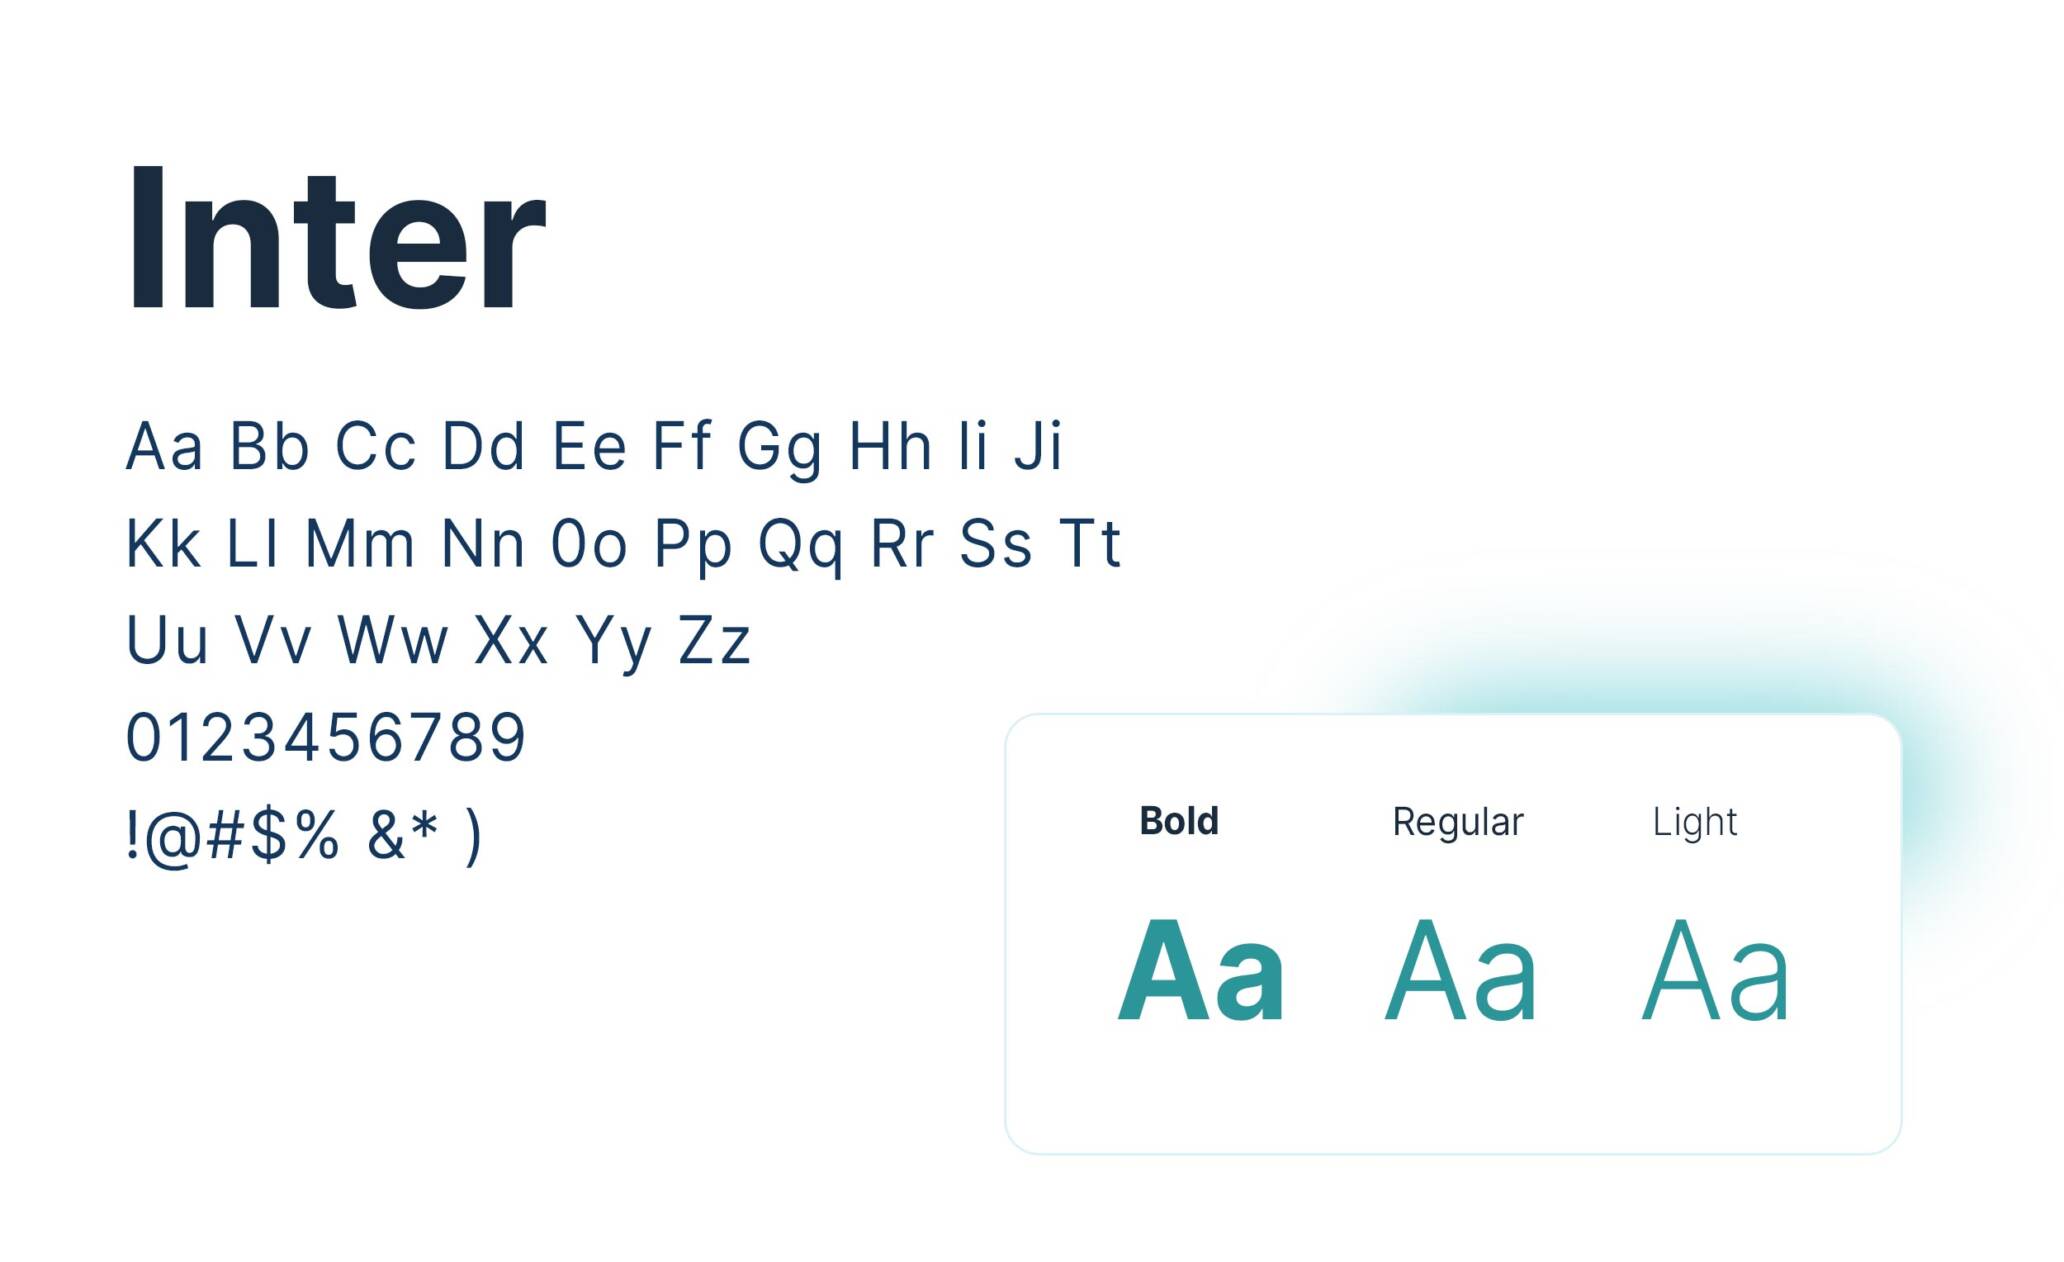 Typography guide for Inter font.